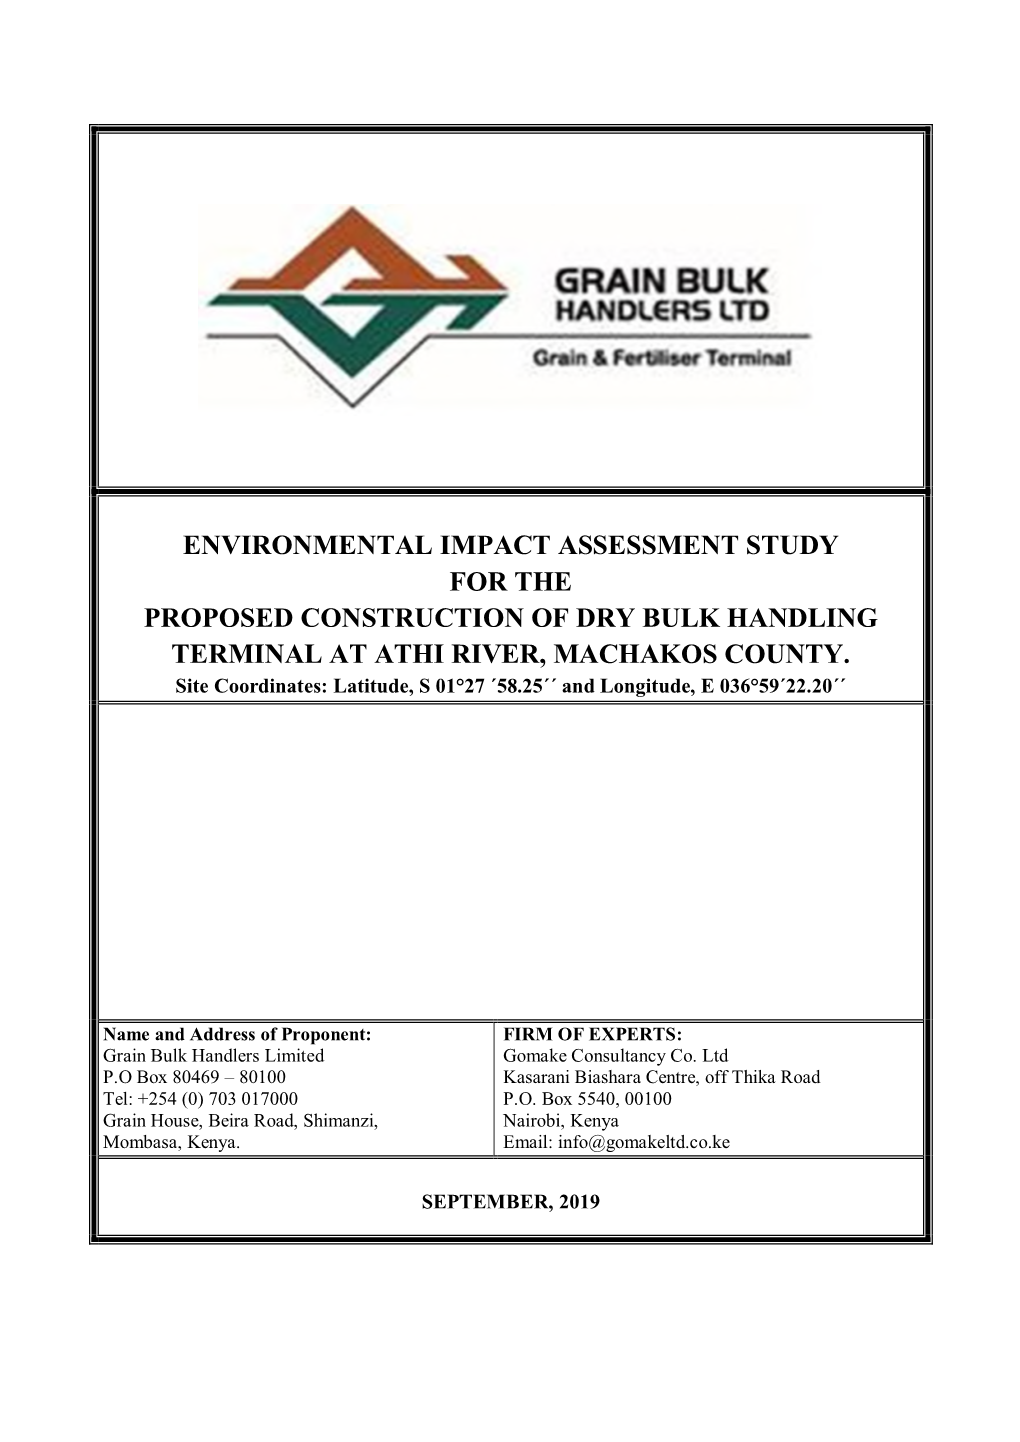 Environmental Impact Assessment Study for the Proposed Construction of Dry Bulk Handling Terminal at Athi River, Machakos County